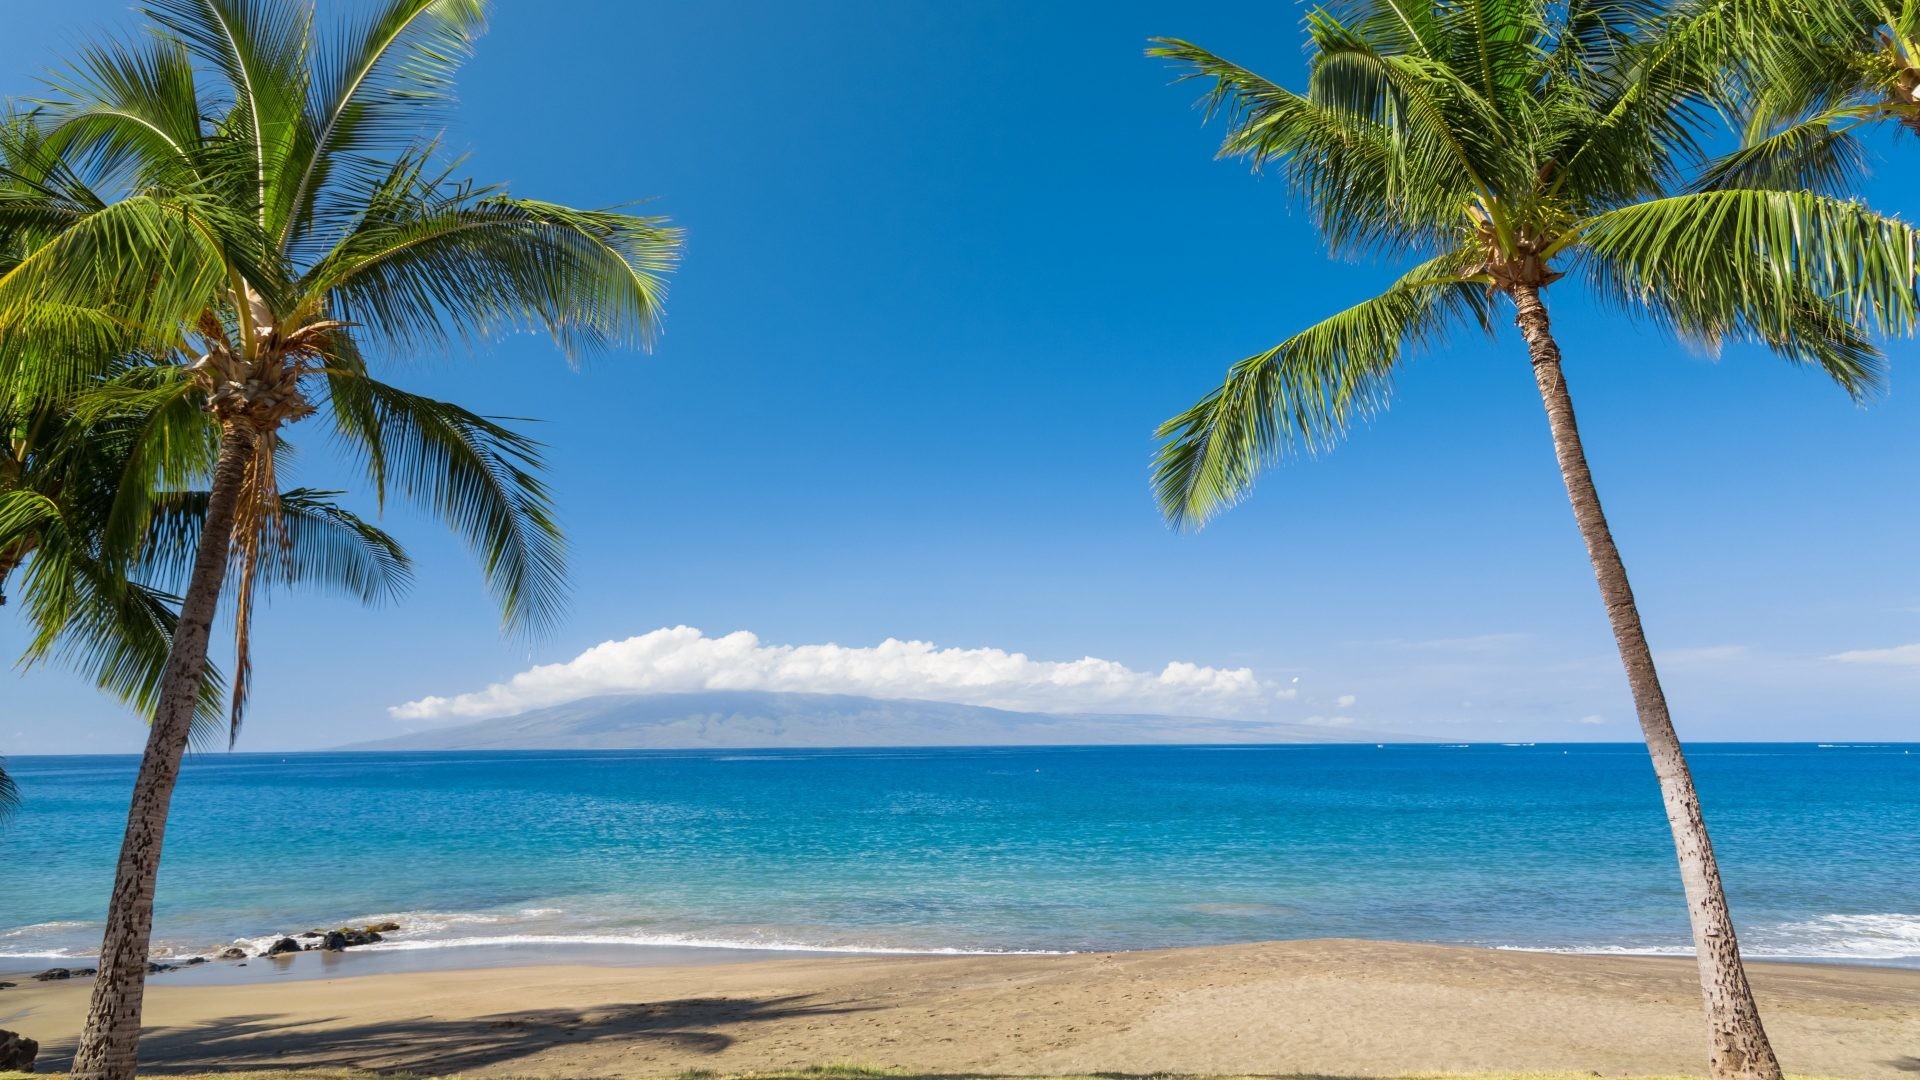 1920x1080 2560x1711 Hawaii images crazy blue ocean HD wallpaper and background photos